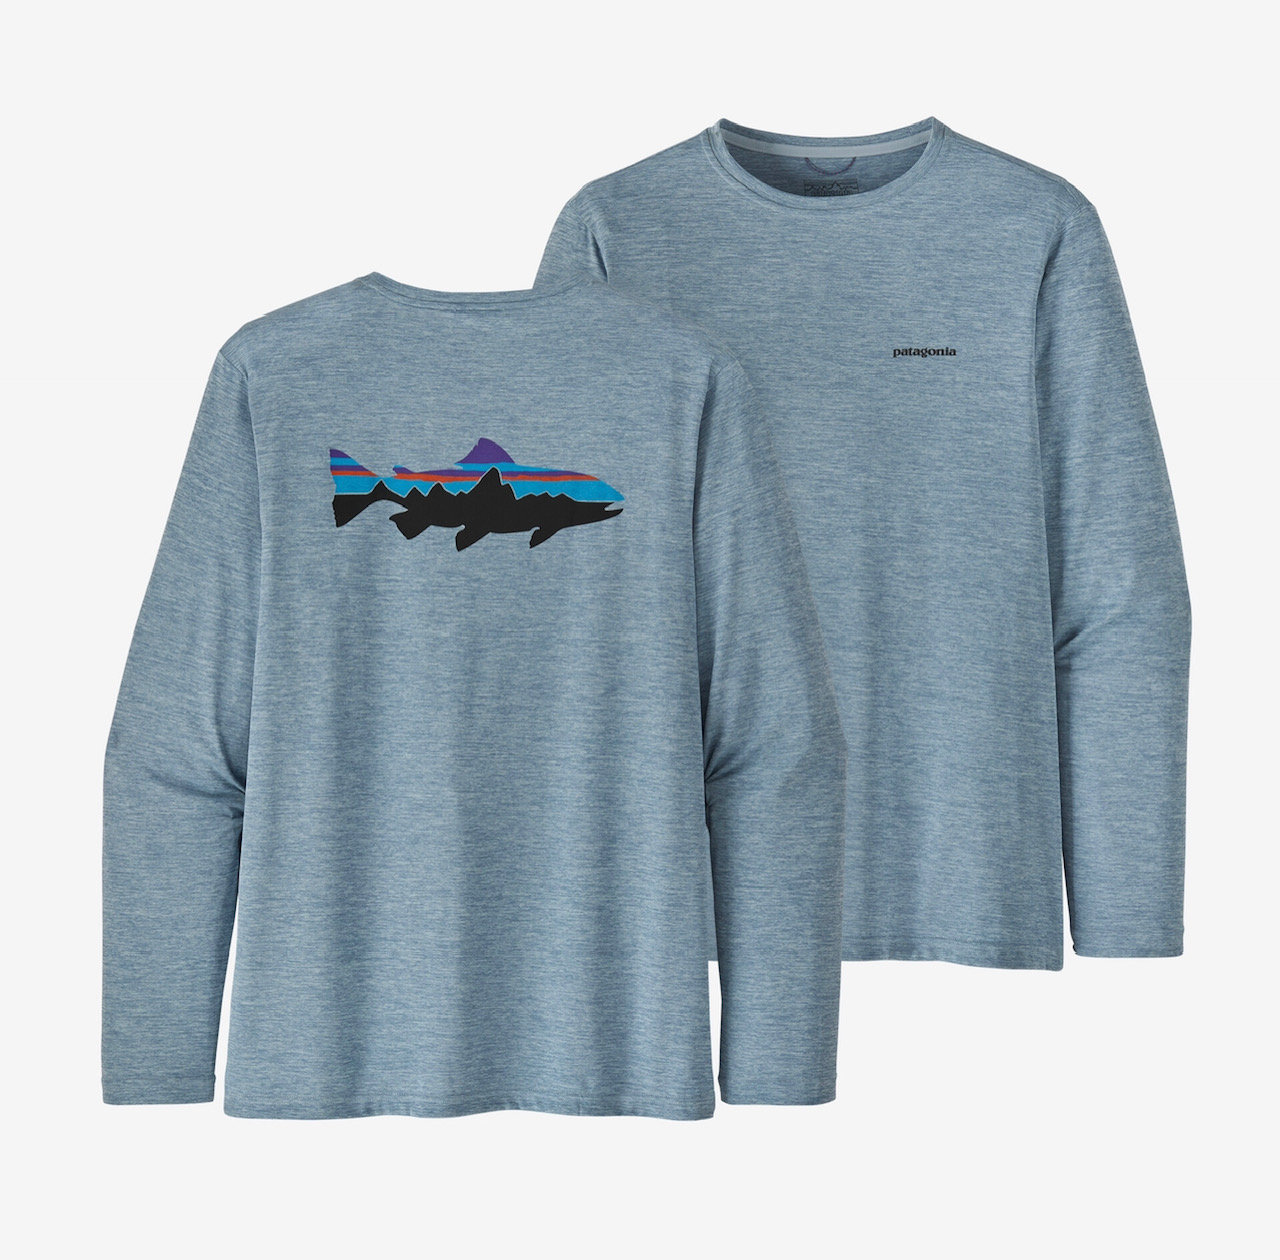 Patagonia M's L/S Capilene Cool Daily Fish Graphic Shirt - Fitz Roy Trout: Steam Blue X-Dye - Large